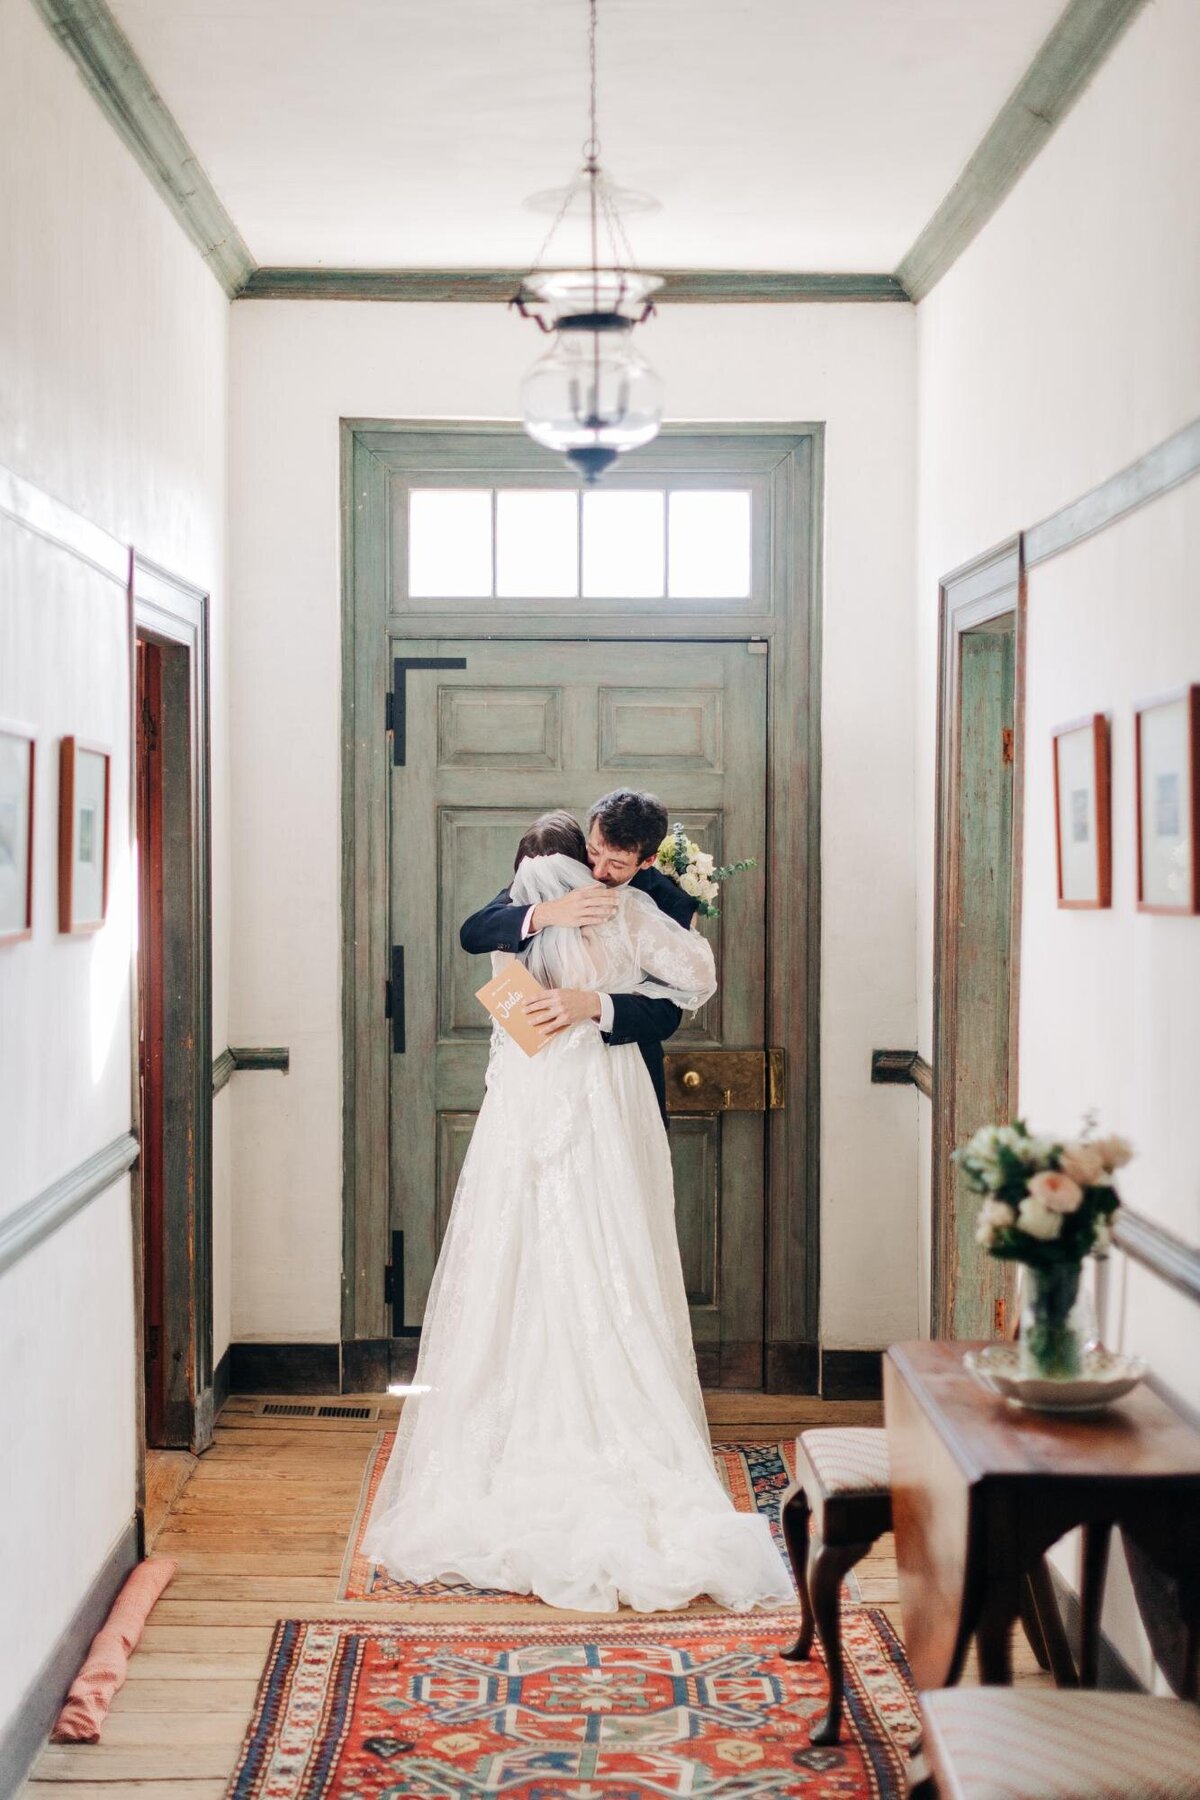 A bride and groom sharing an embrace in a vintage hallway with rustic decor.